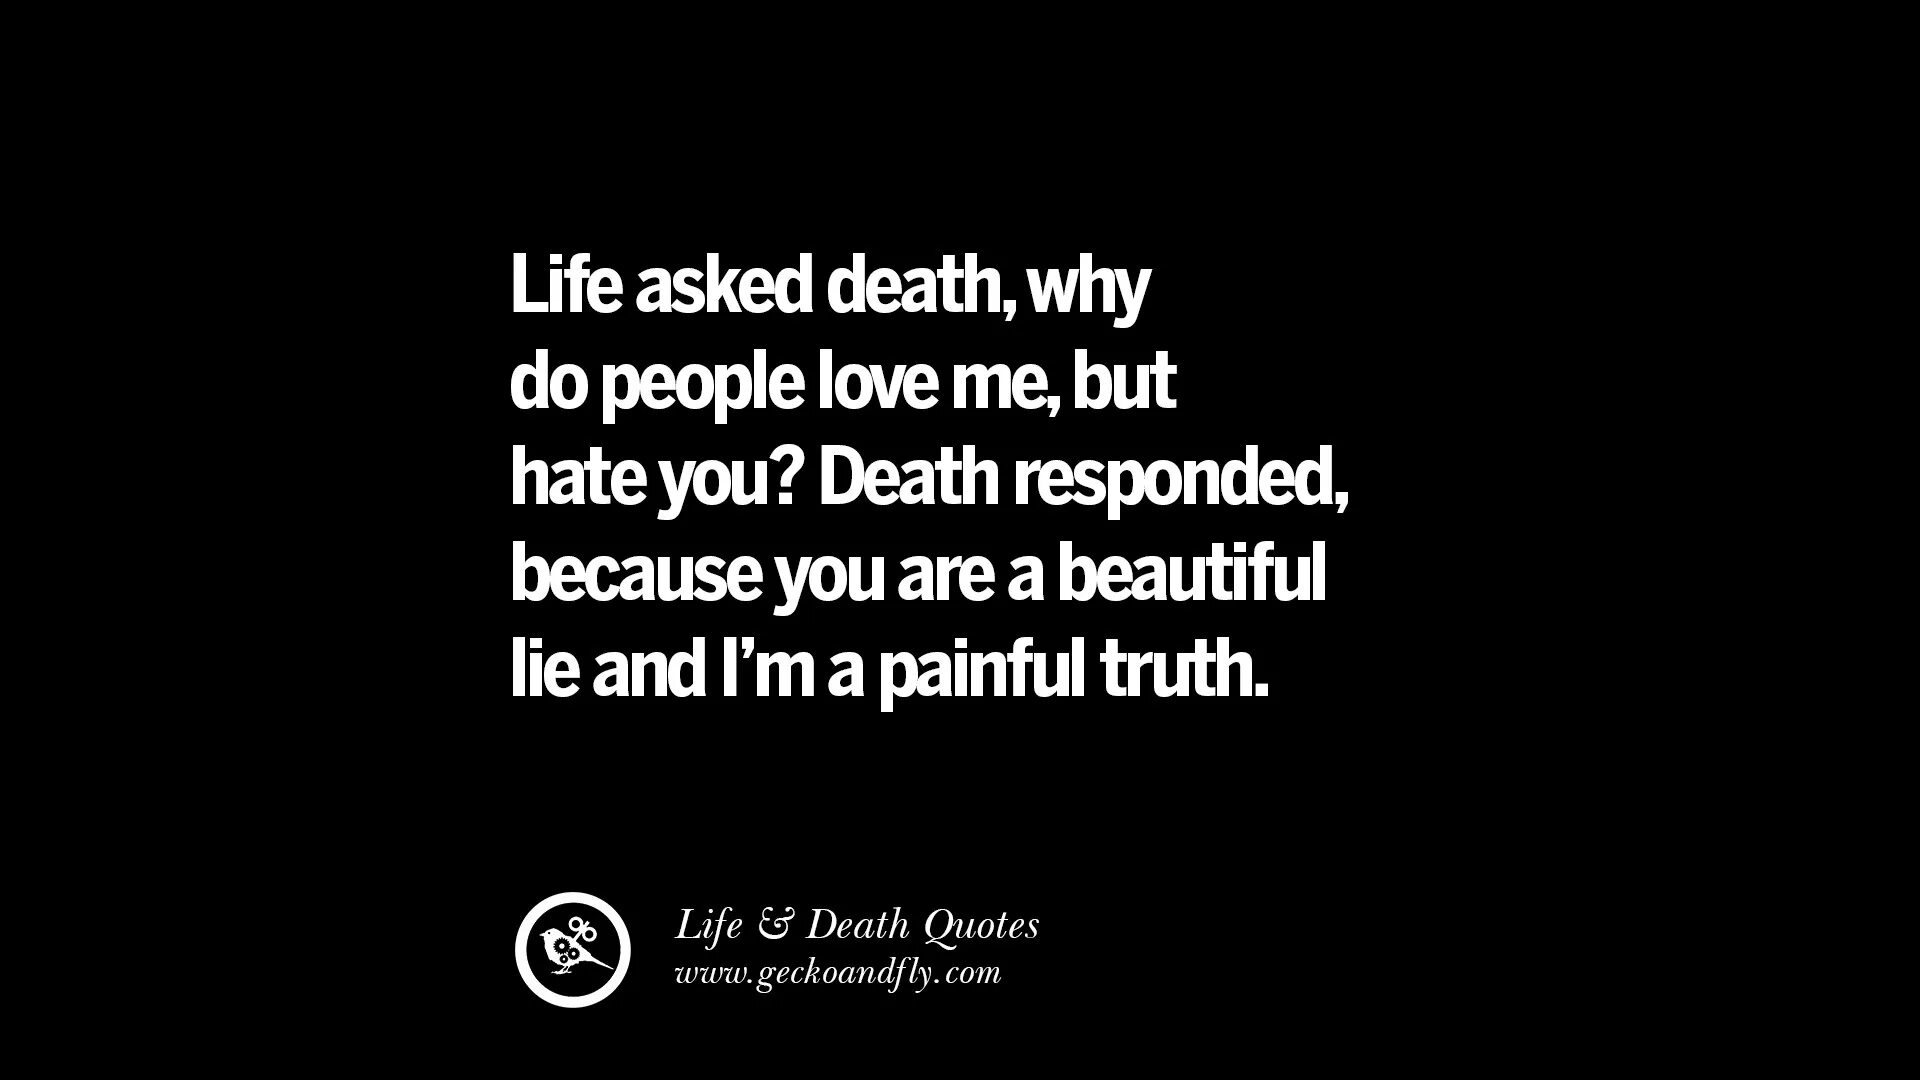 Life is dead. Death quotes. Quotes about Death. Death in Love.